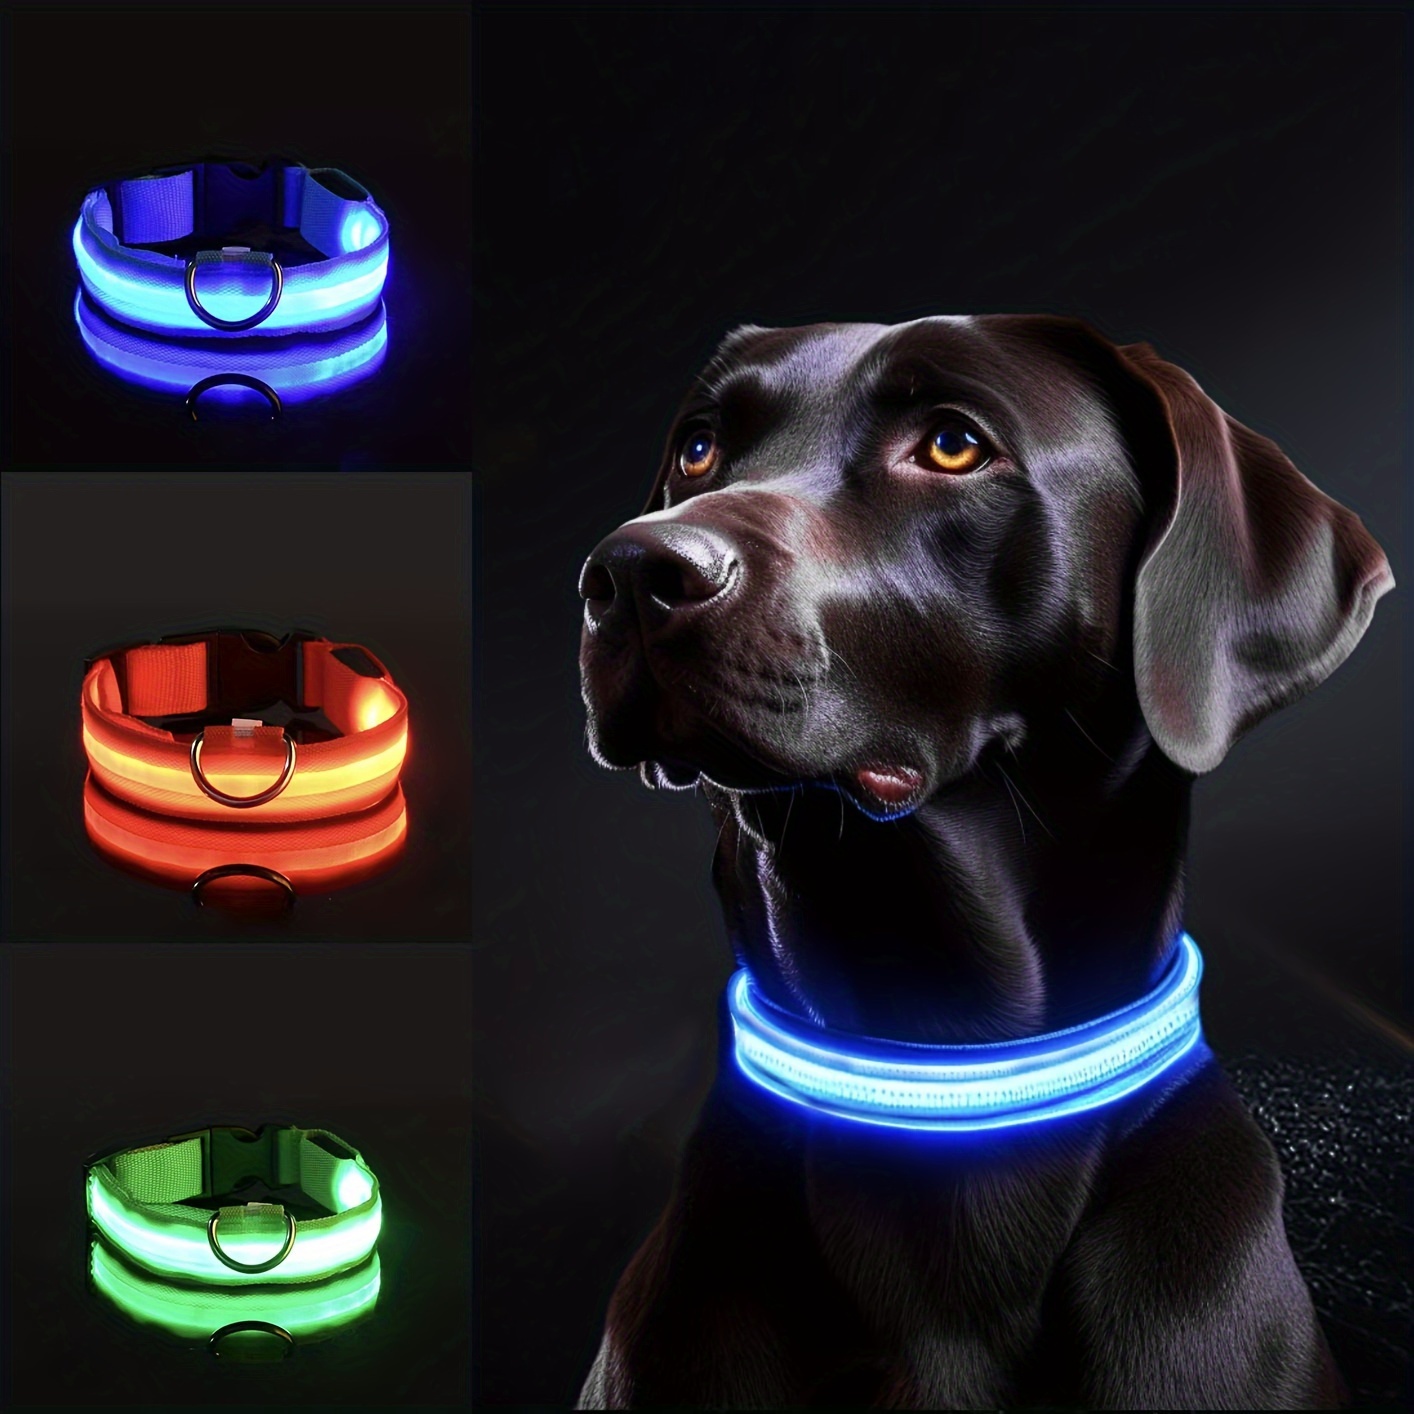 

Adjustable Led Dog Collar, Glowing Light-up Collar For Night Safety, Waterproof Luminous Pet Collar For Small, Medium, Large Dogs - Battery Powered, Polyester Fiber Material, Various Sizes Available